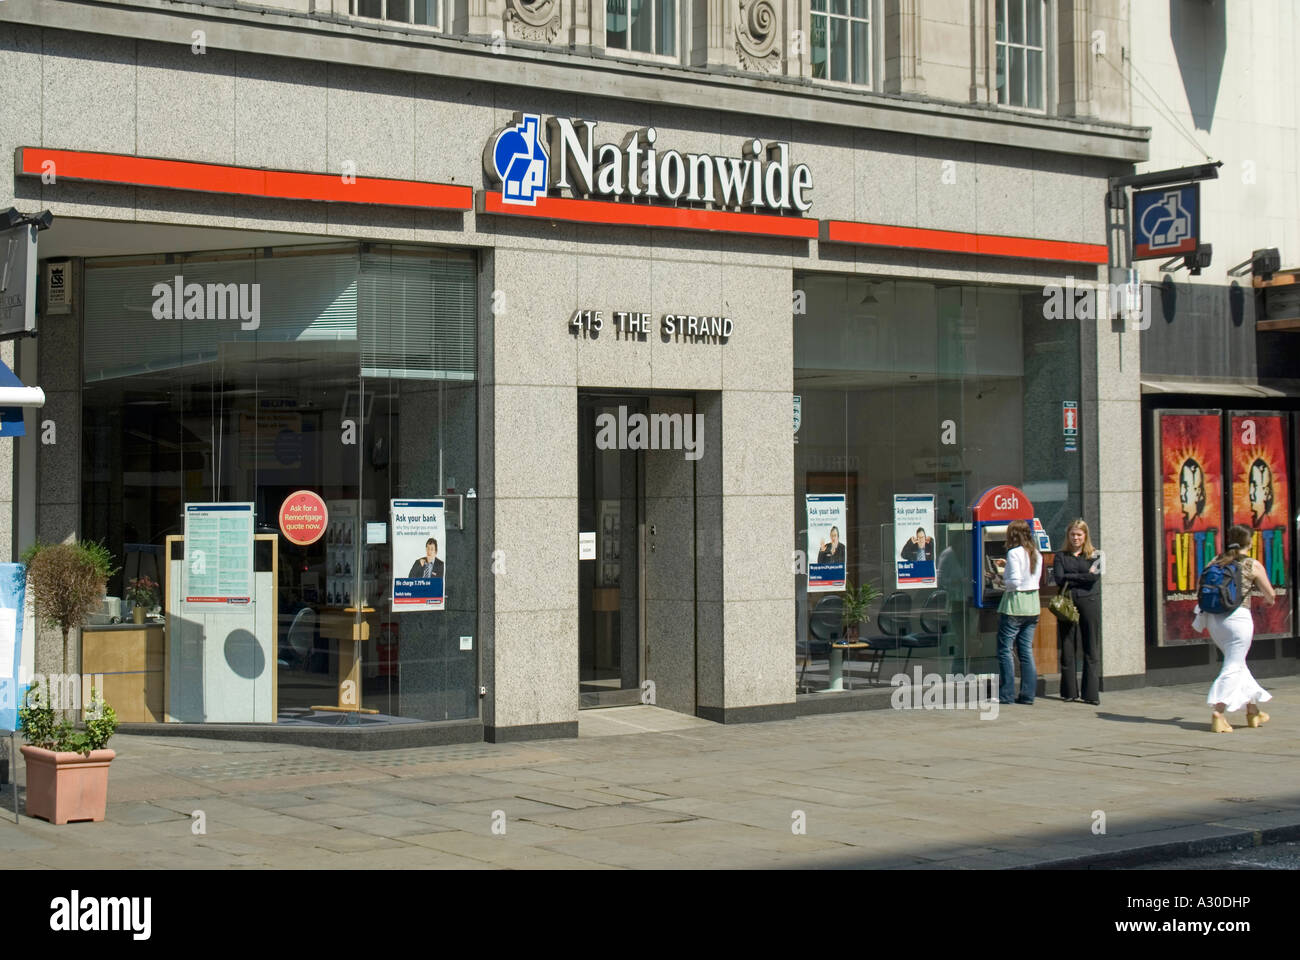 Front windows & entrance to branch premises of Nationwide Building Society people using hole in wall ATM cash machine The Strand London England UK Stock Photo